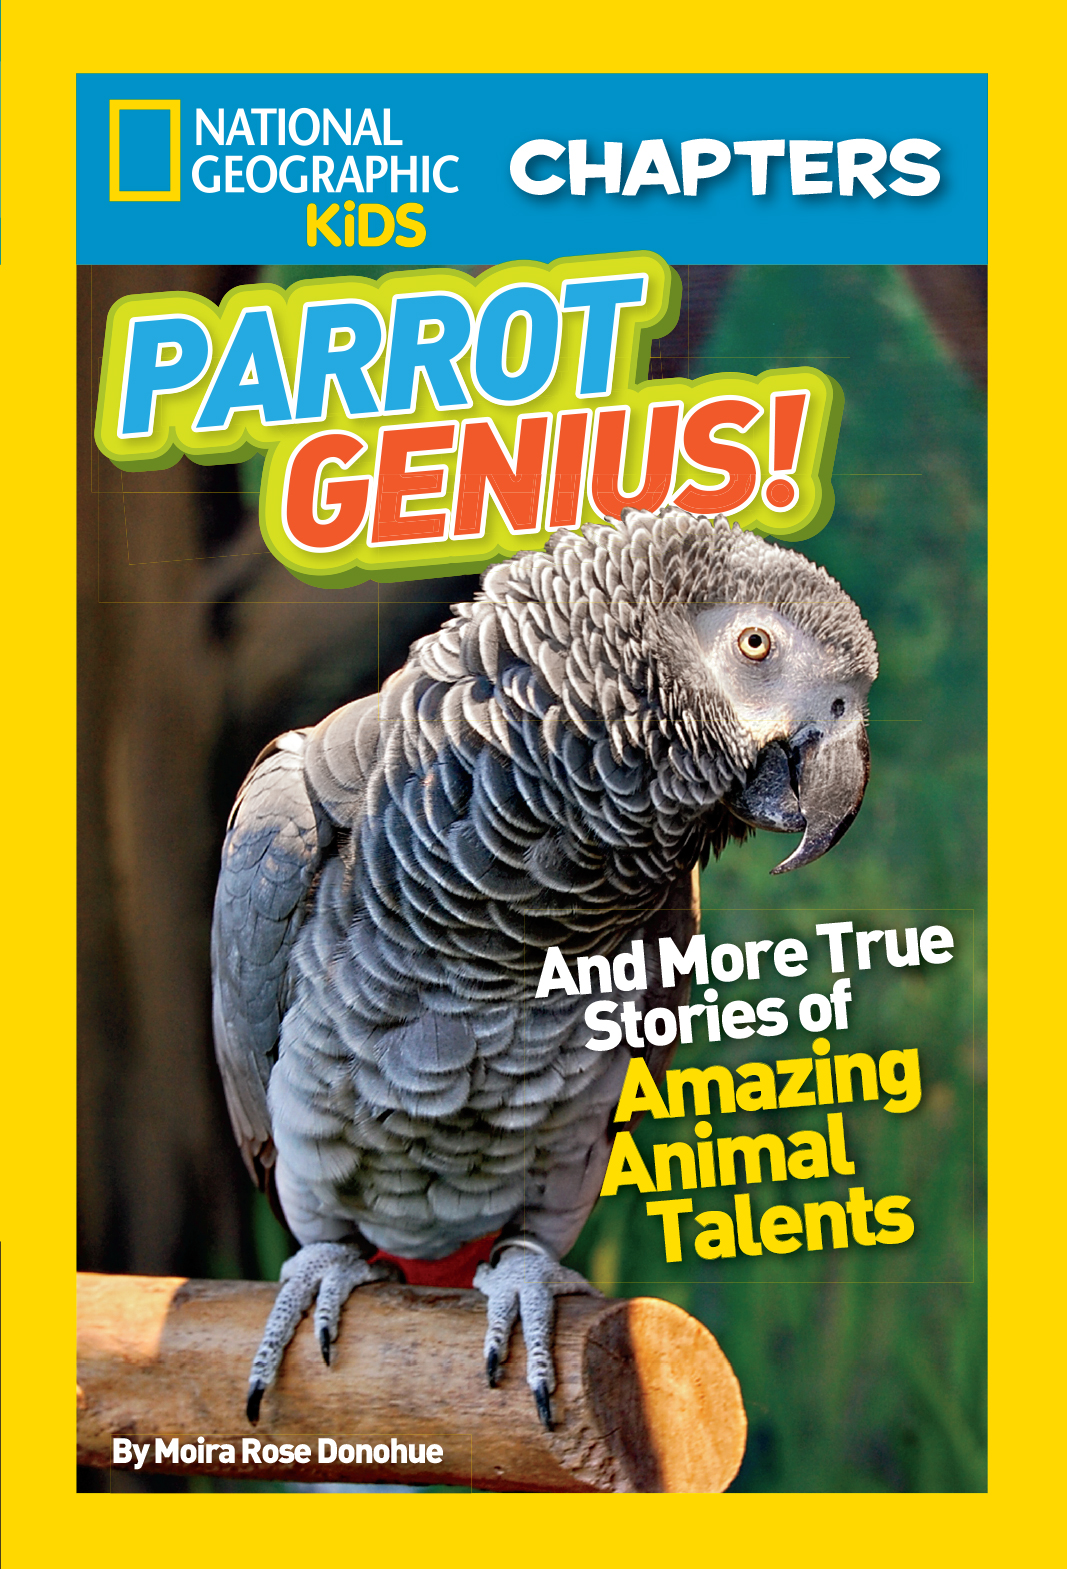 National Geographic kids chapters: parrot genius and more true stories of amazing animal talents cover image